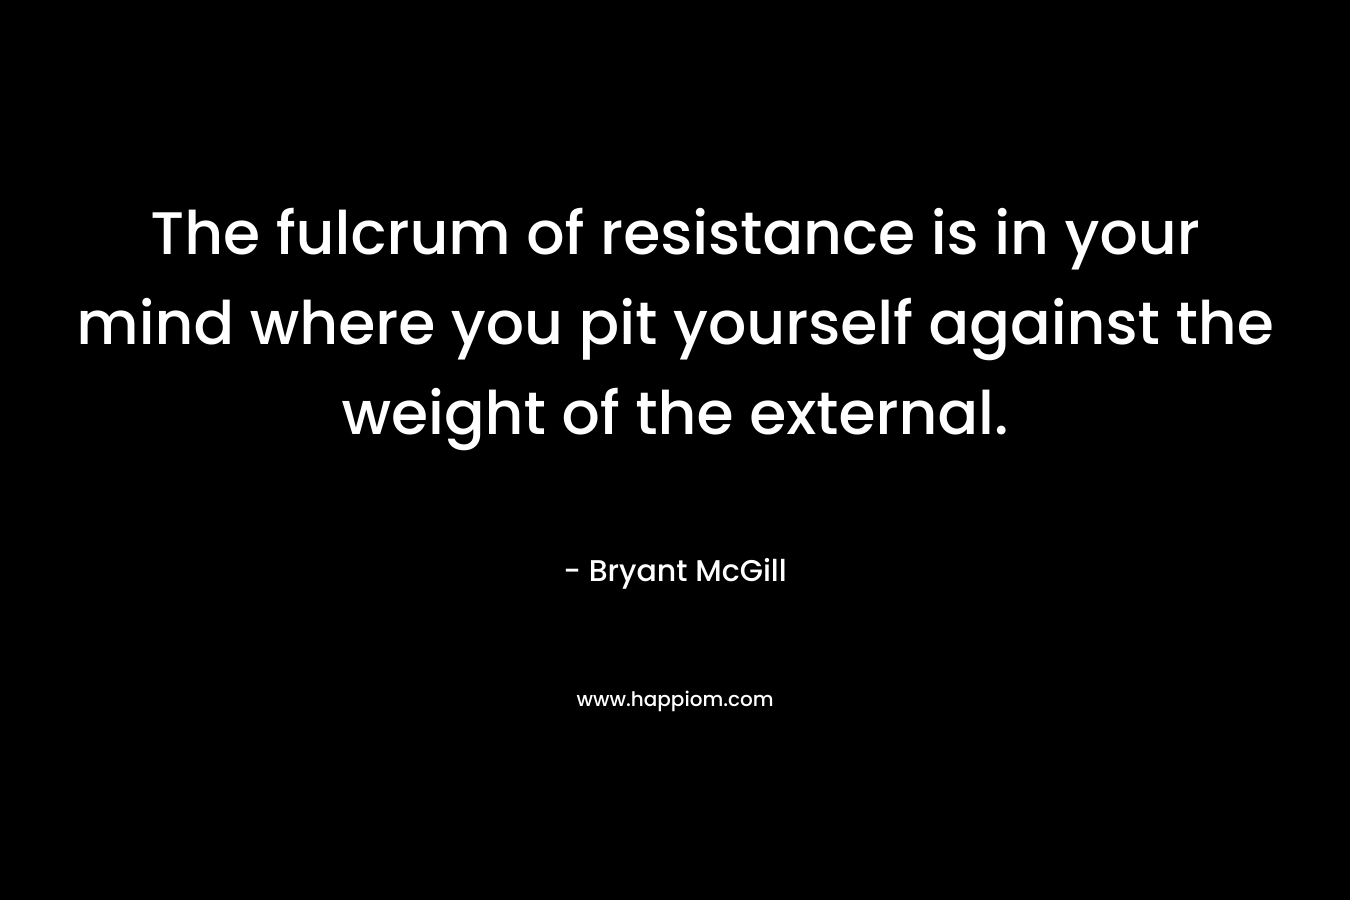 The fulcrum of resistance is in your mind where you pit yourself against the weight of the external.